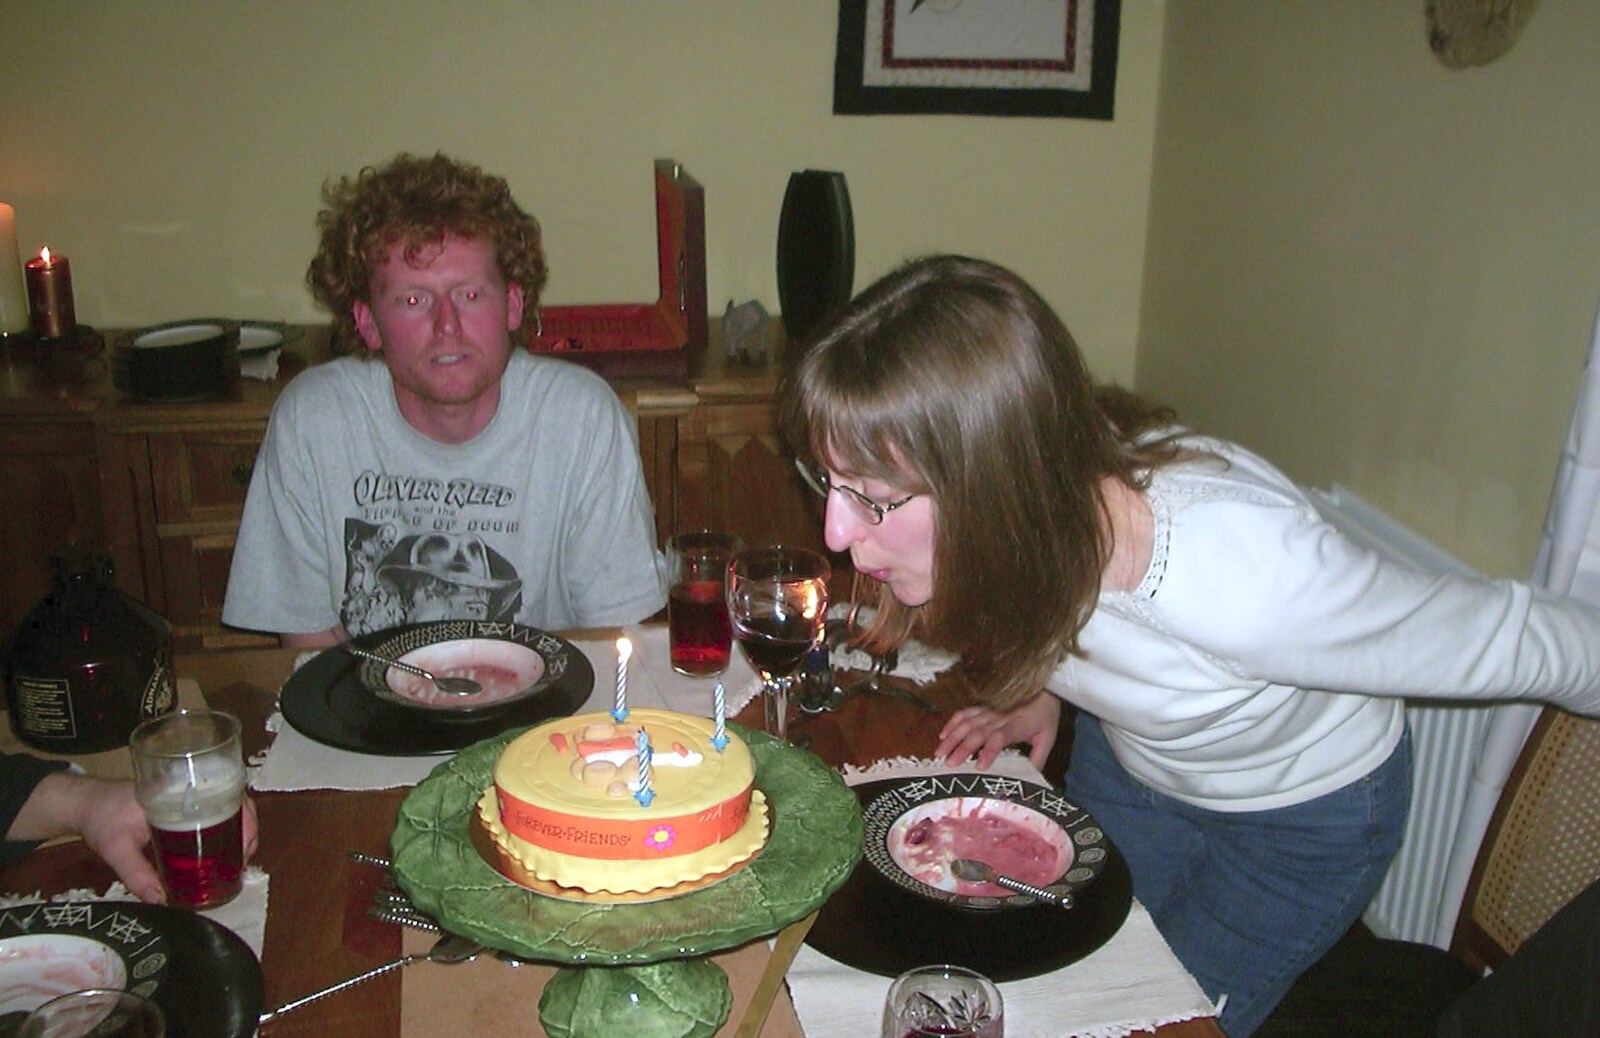 Suey blows her candles out from Suey's Actual Birthday, Thorndon, Suffolk - 2nd April 2002